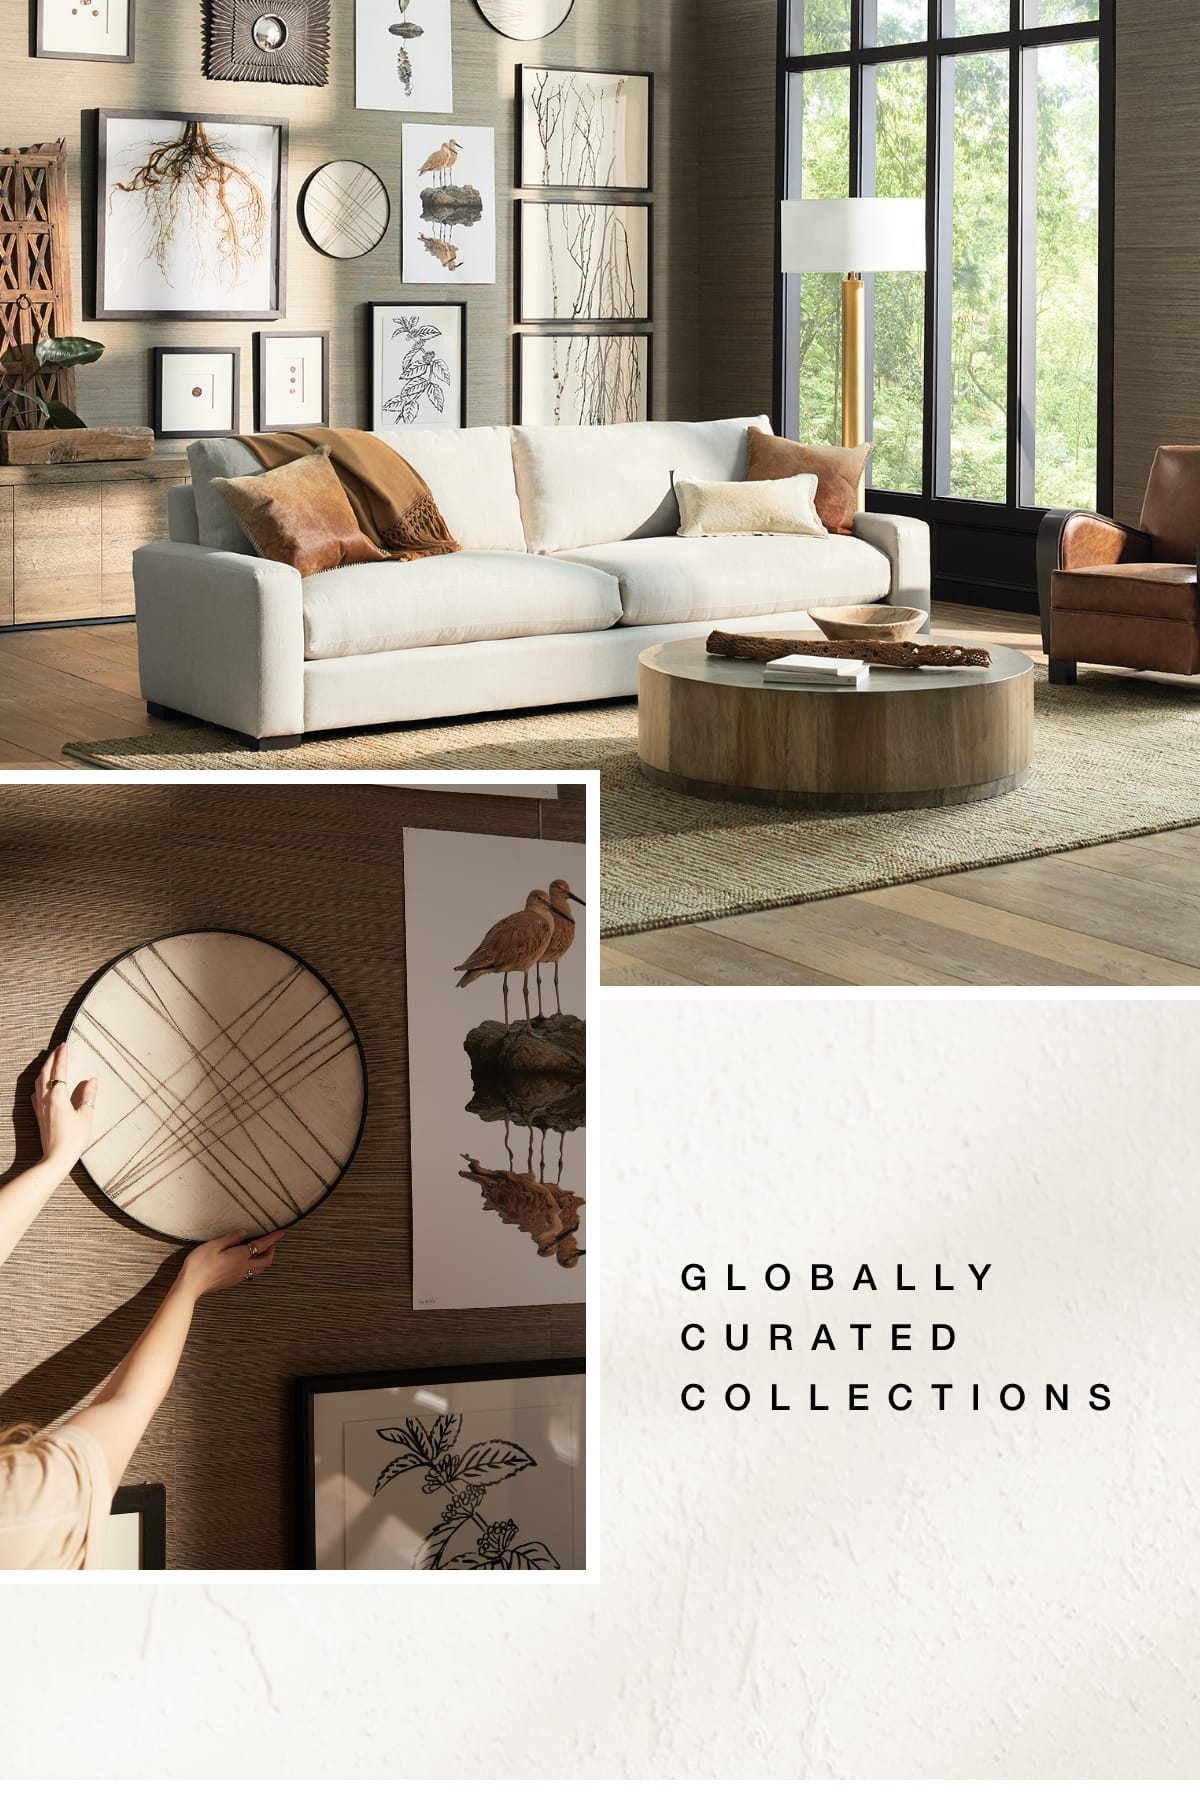 Globally curated collections